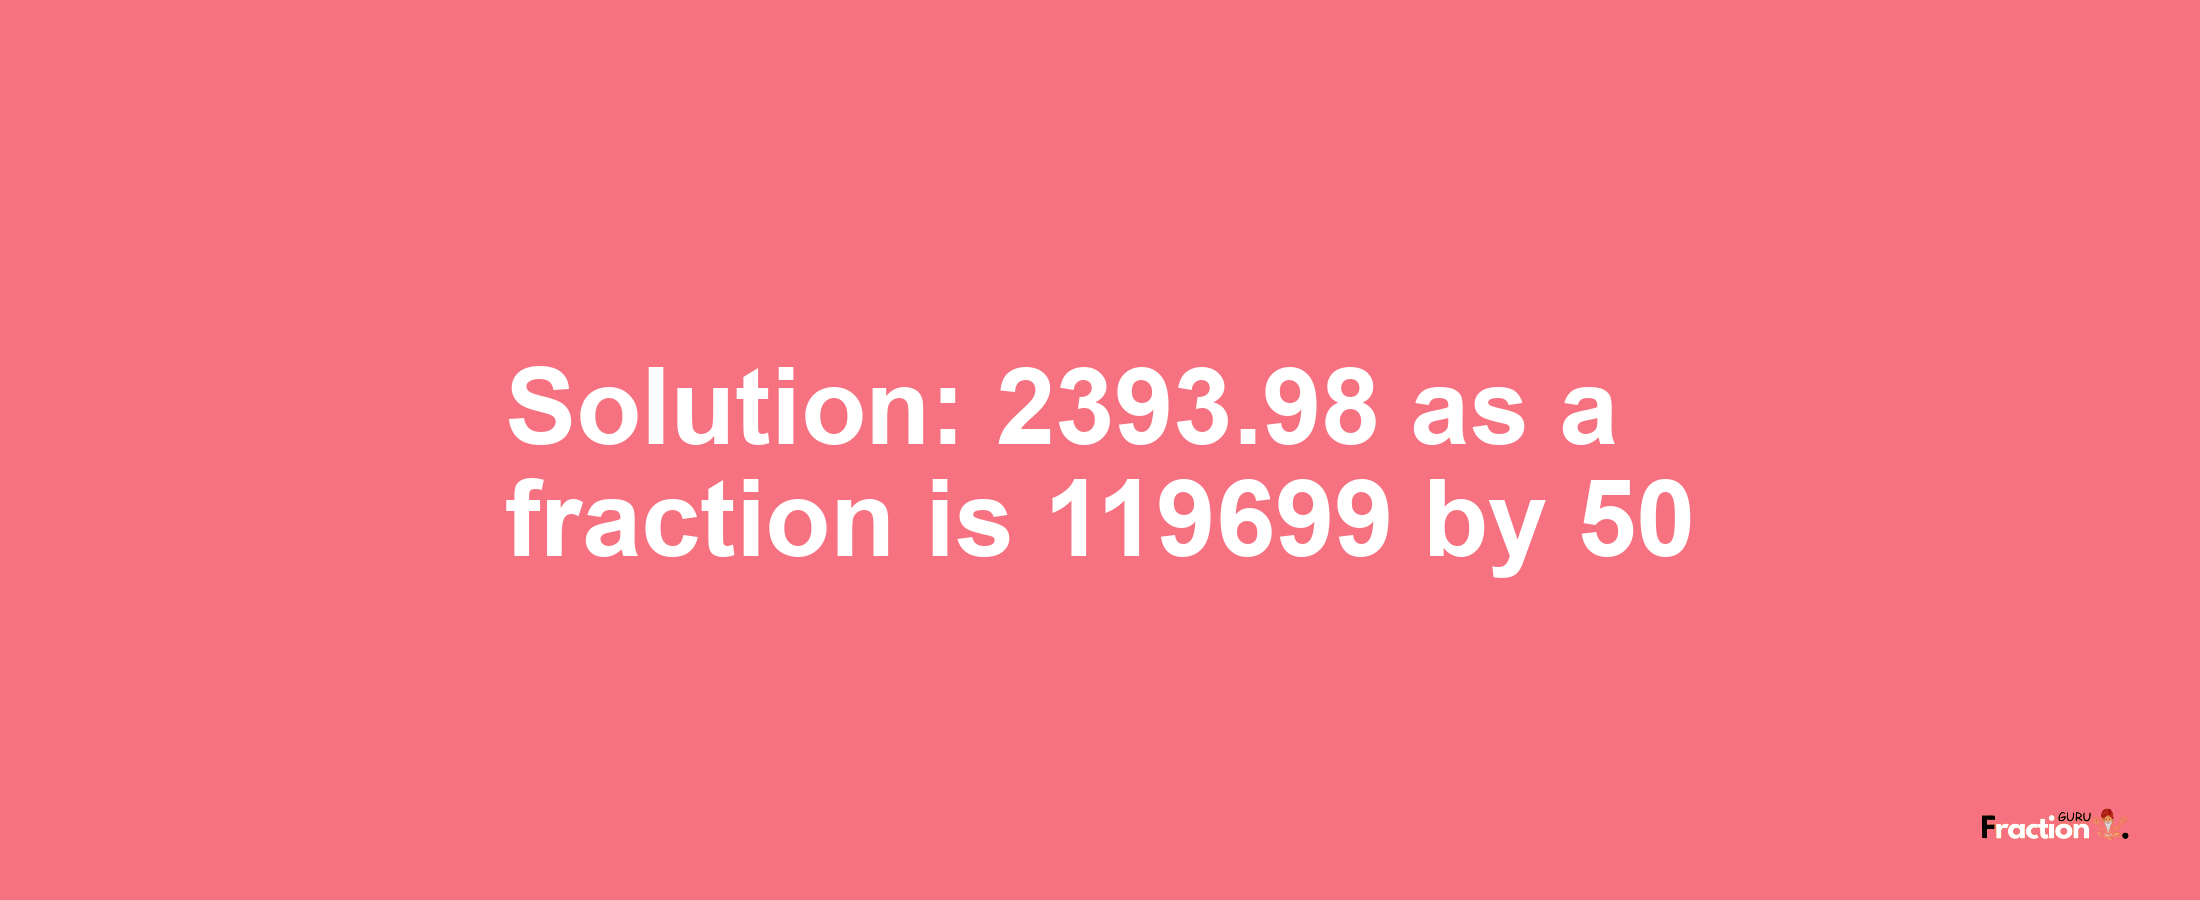 Solution:2393.98 as a fraction is 119699/50